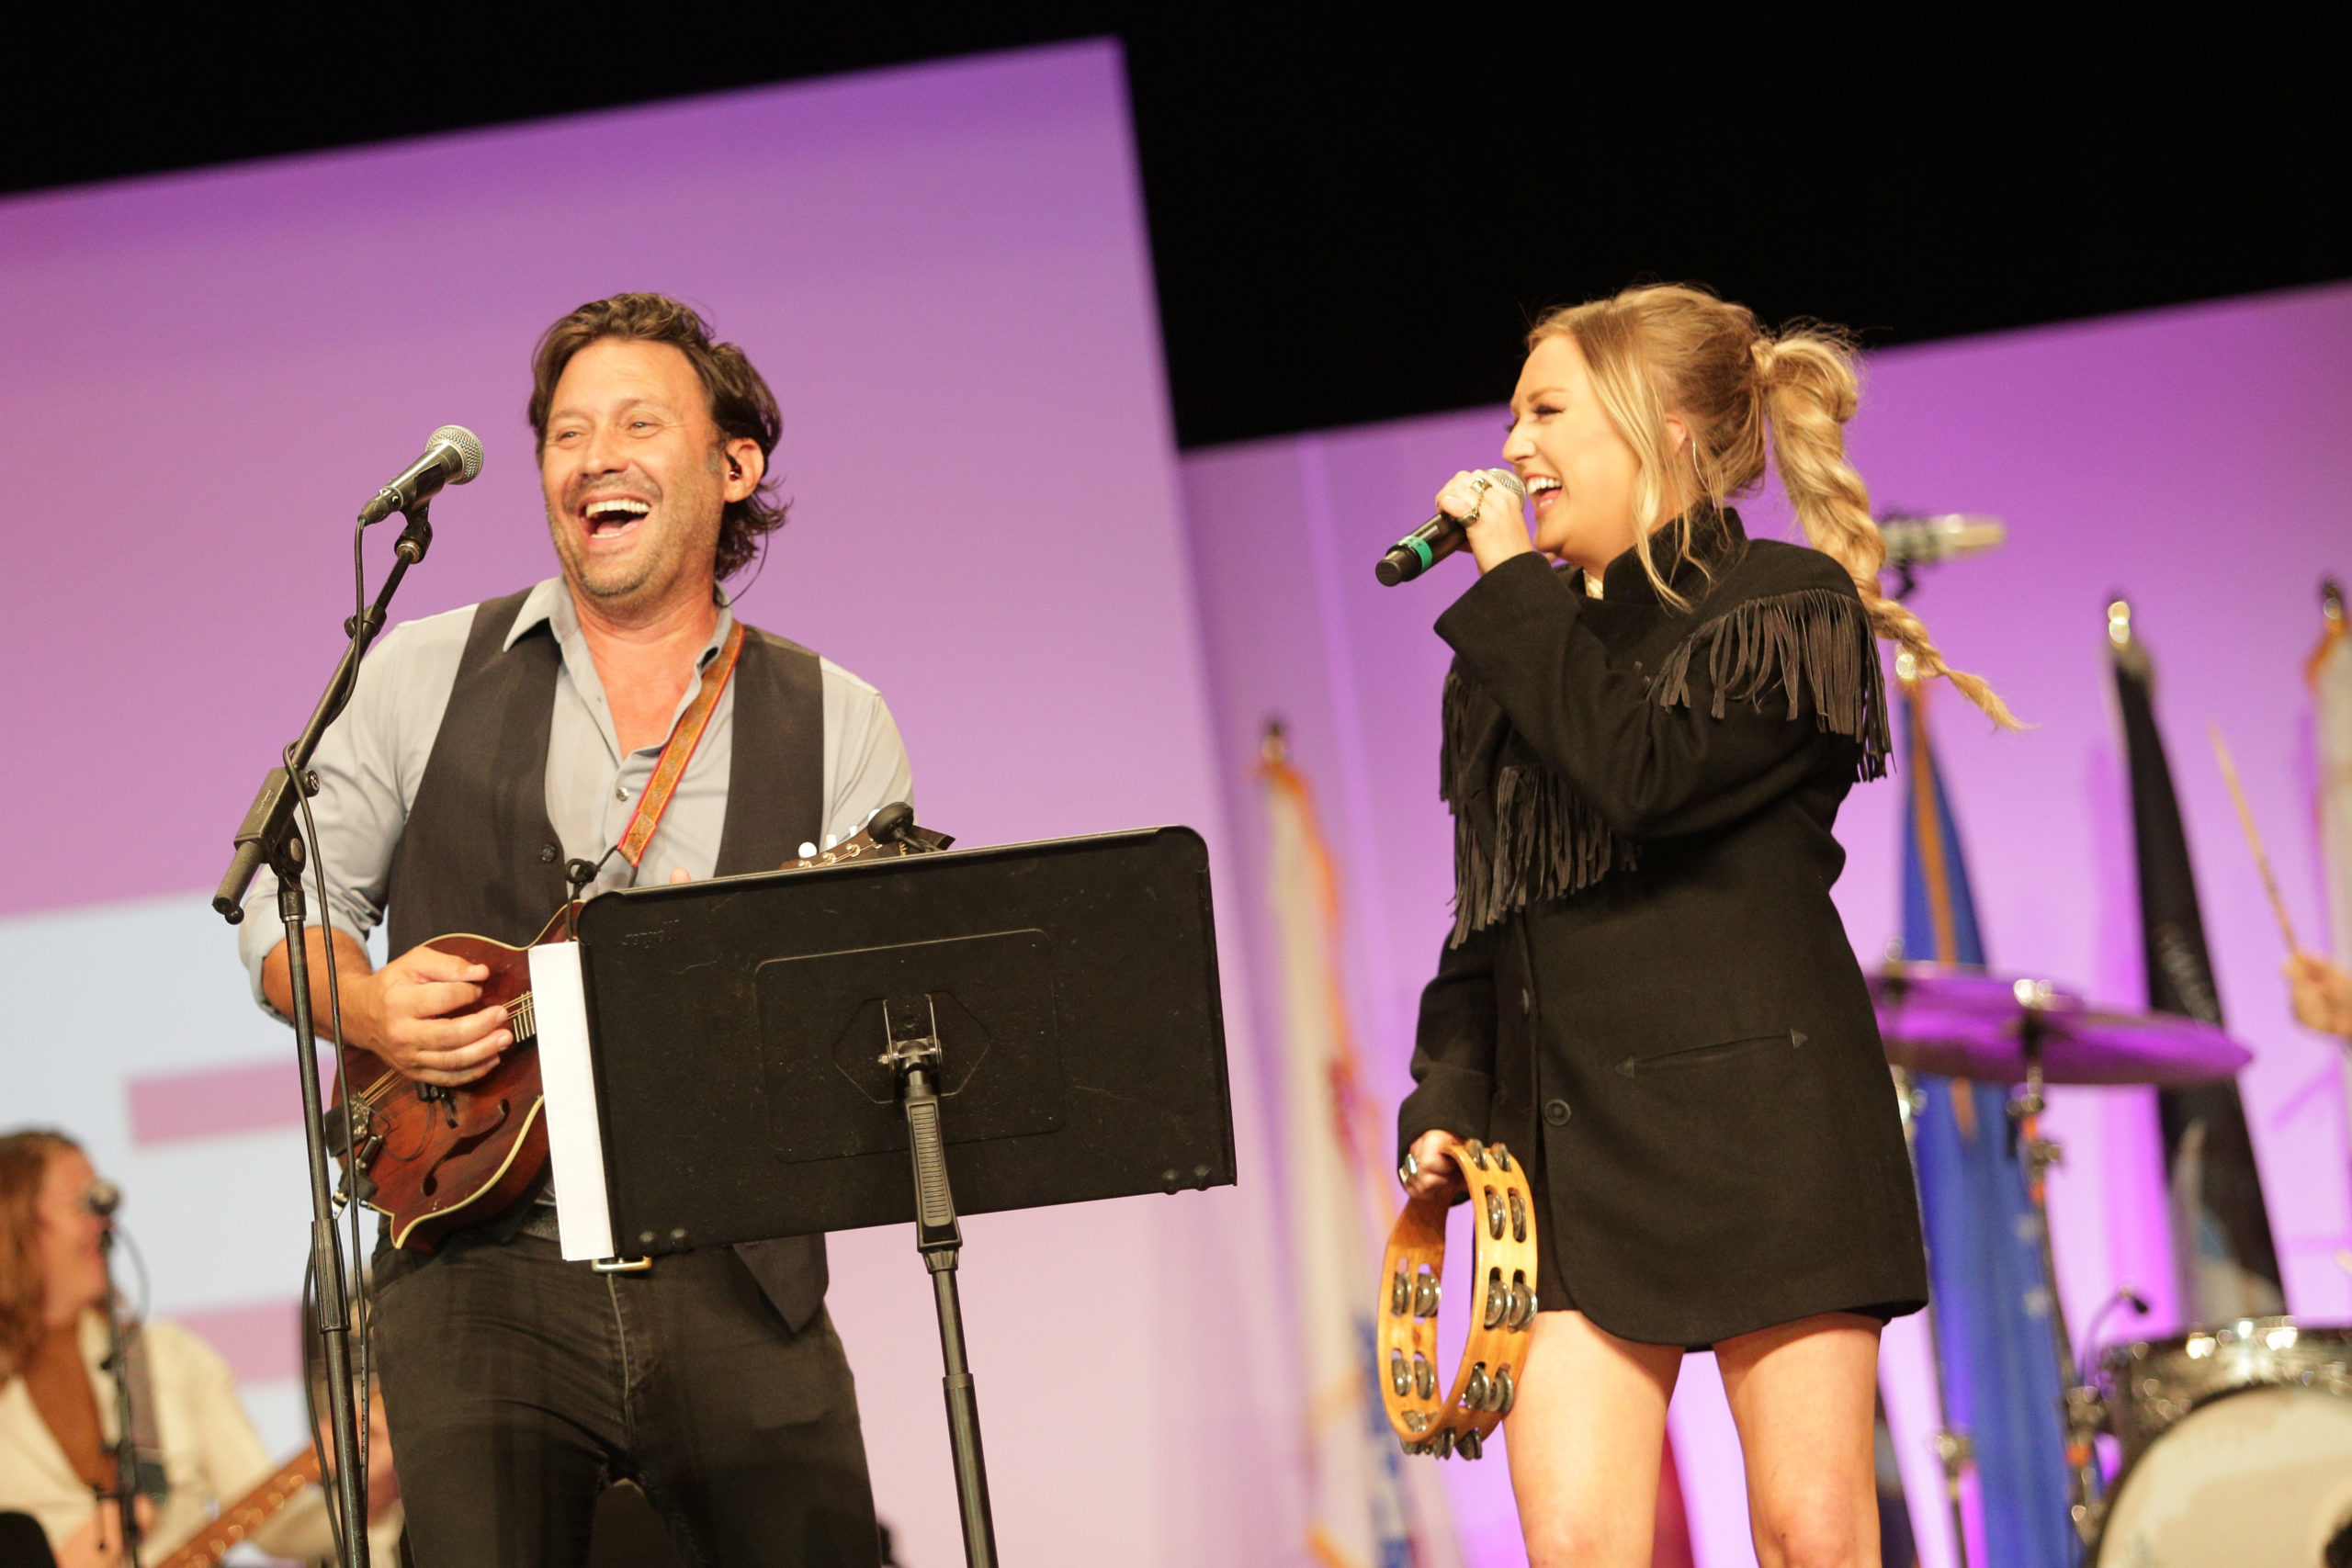 Travis Howard and Hailey Steele bring the crowd to their feet during the RISE22 opening ceremony concert.